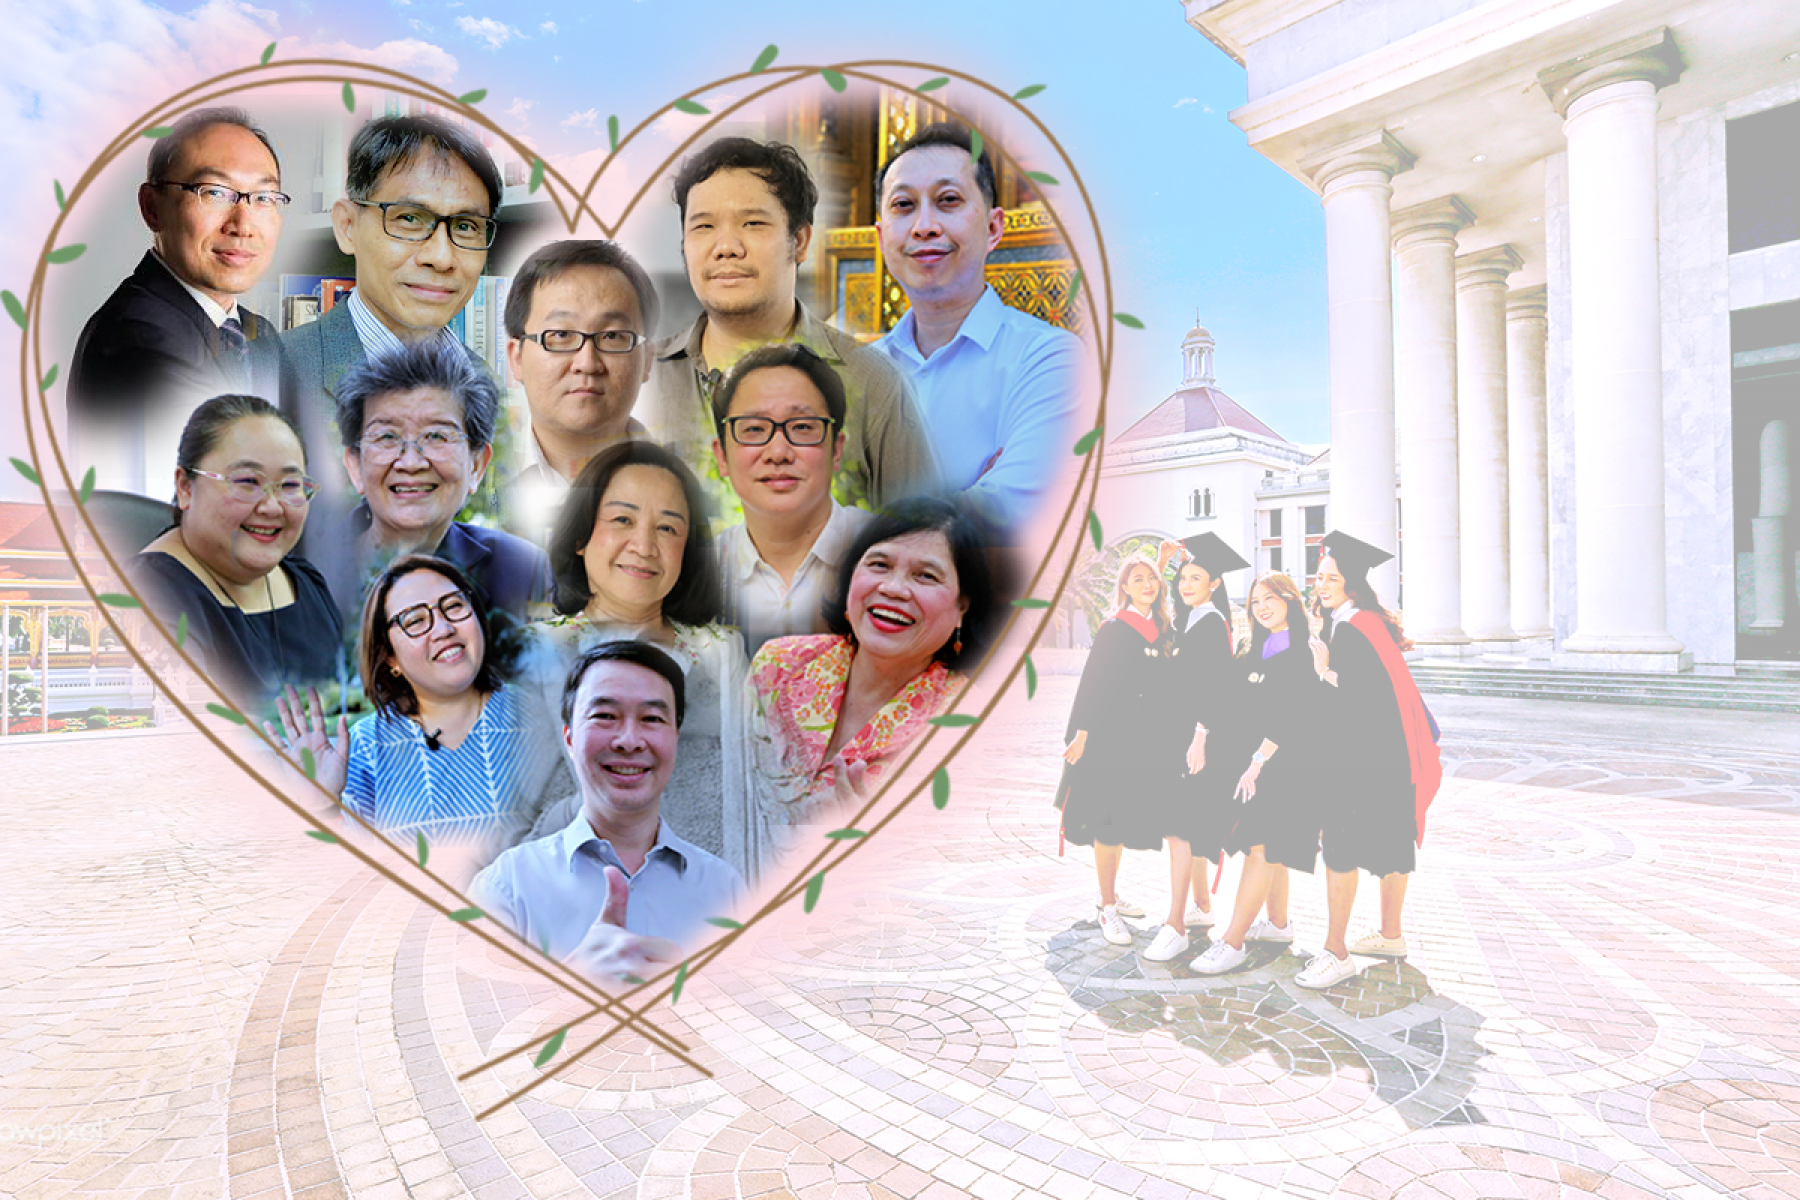 Deans of 12 Faculties Congratulate all Graduates Classes of 2019 and 2020